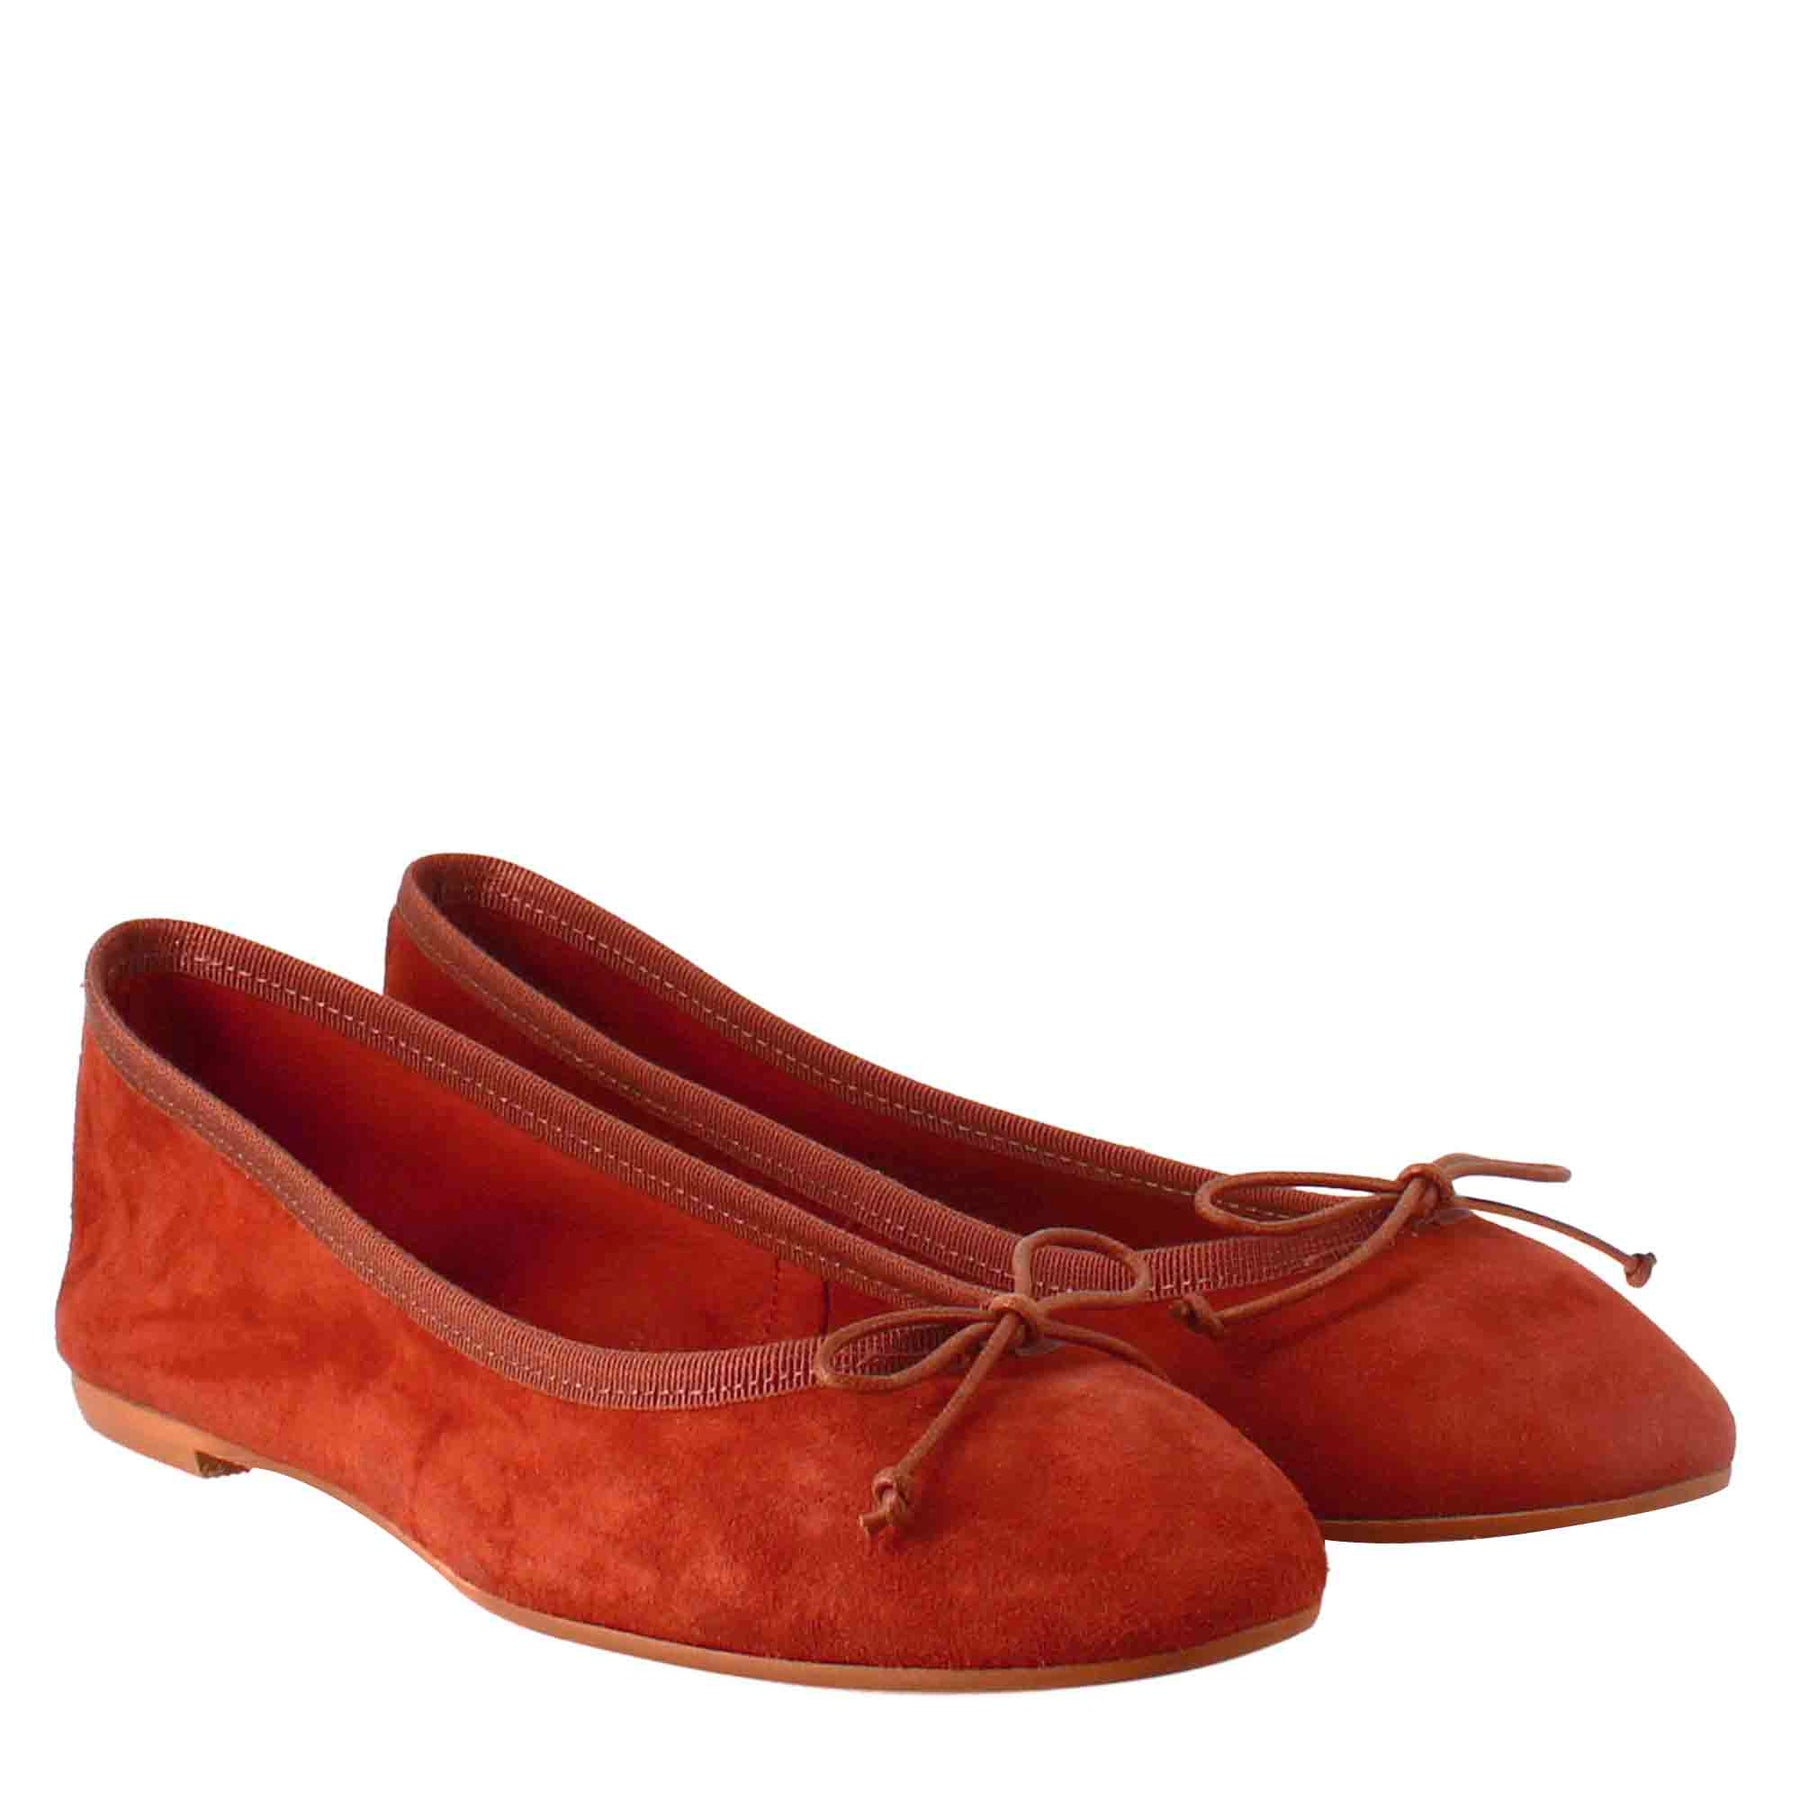 Light brick-colored women's ballet flats in suede without lining